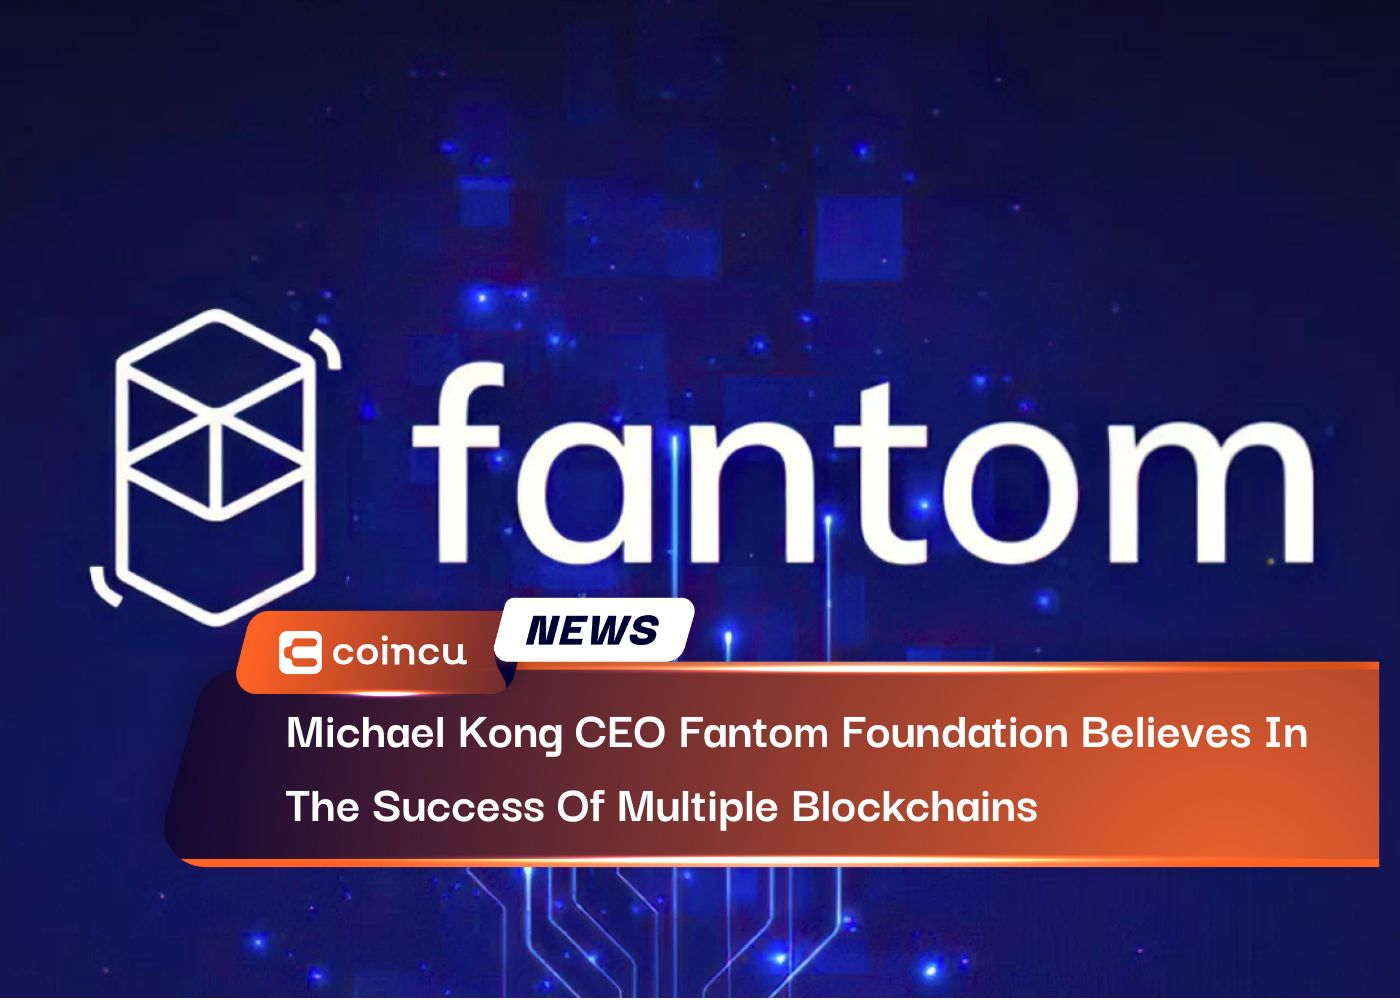 Michael Kong CEO Fantom Foundation Believes In The Success Of Multiple Blockchains